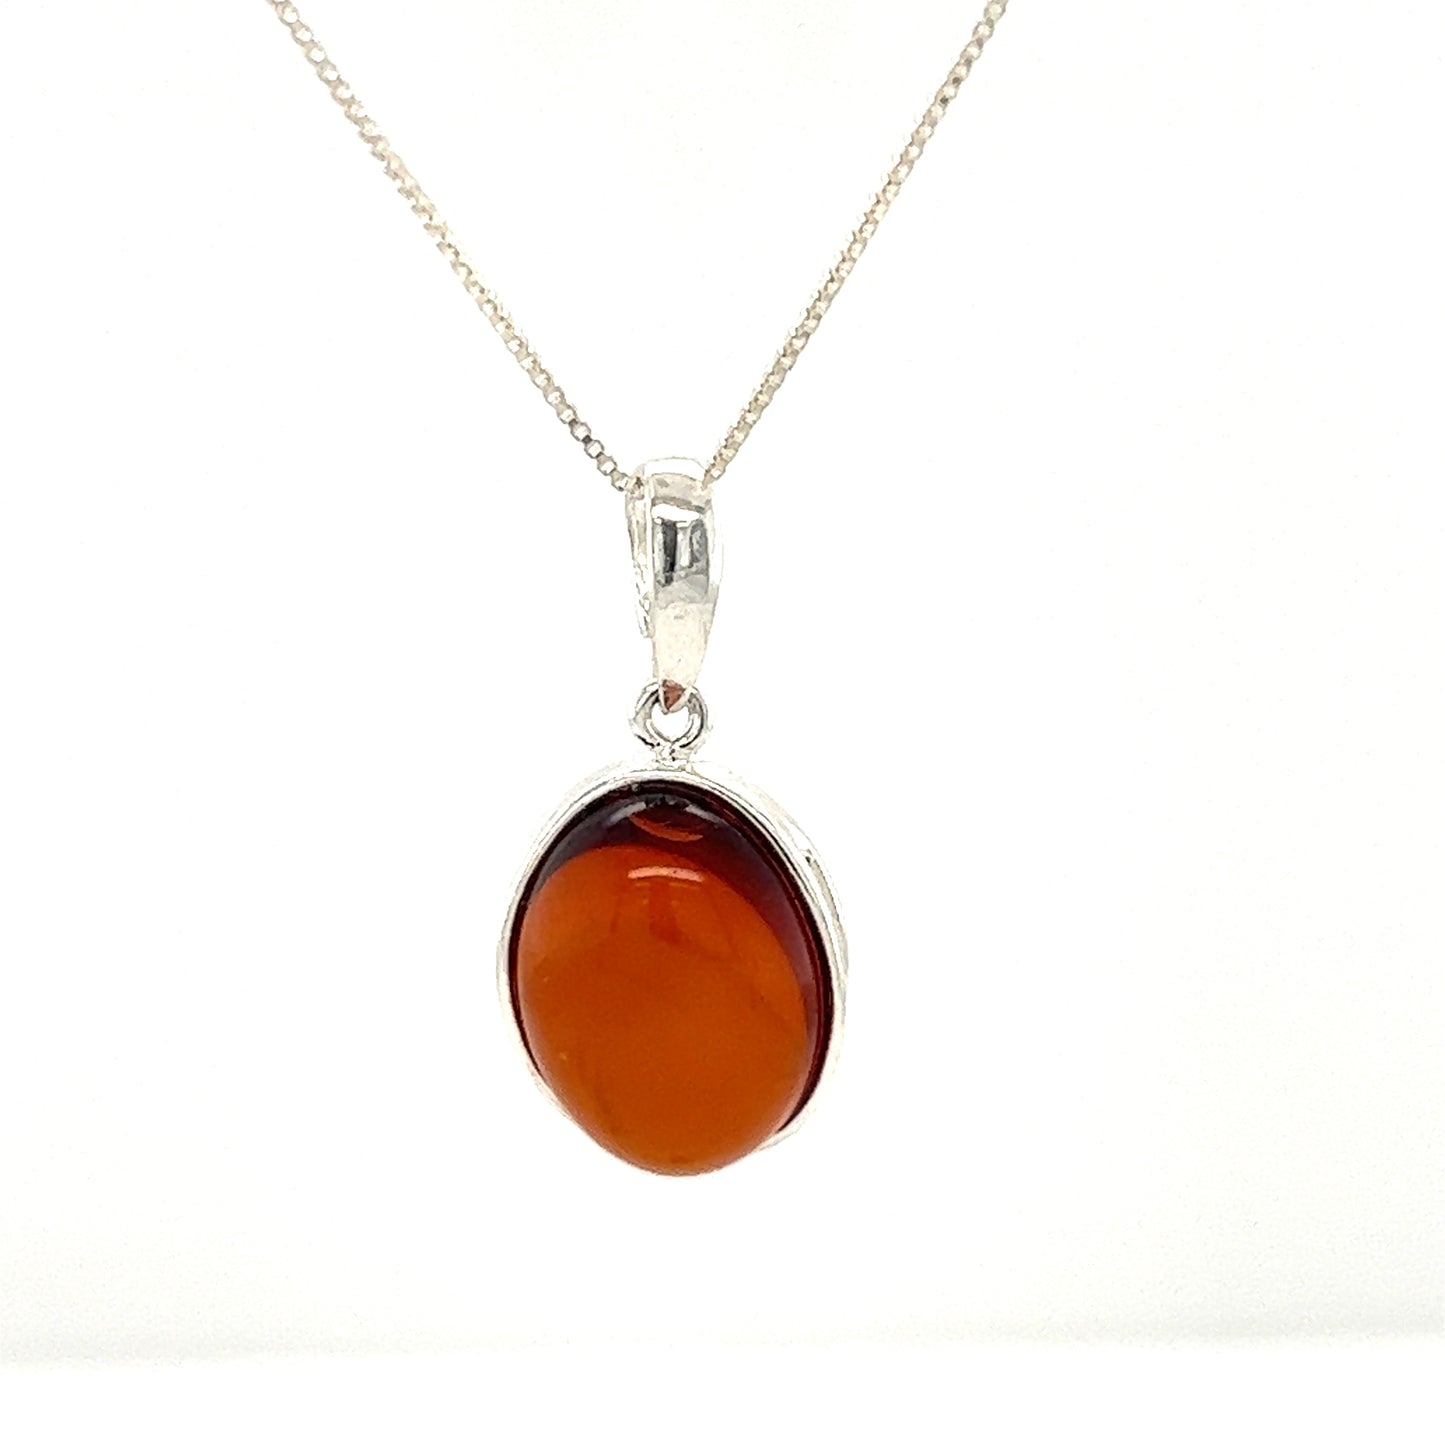 A Super Silver Timeless Oval Amber Pendant, known for its healing properties.